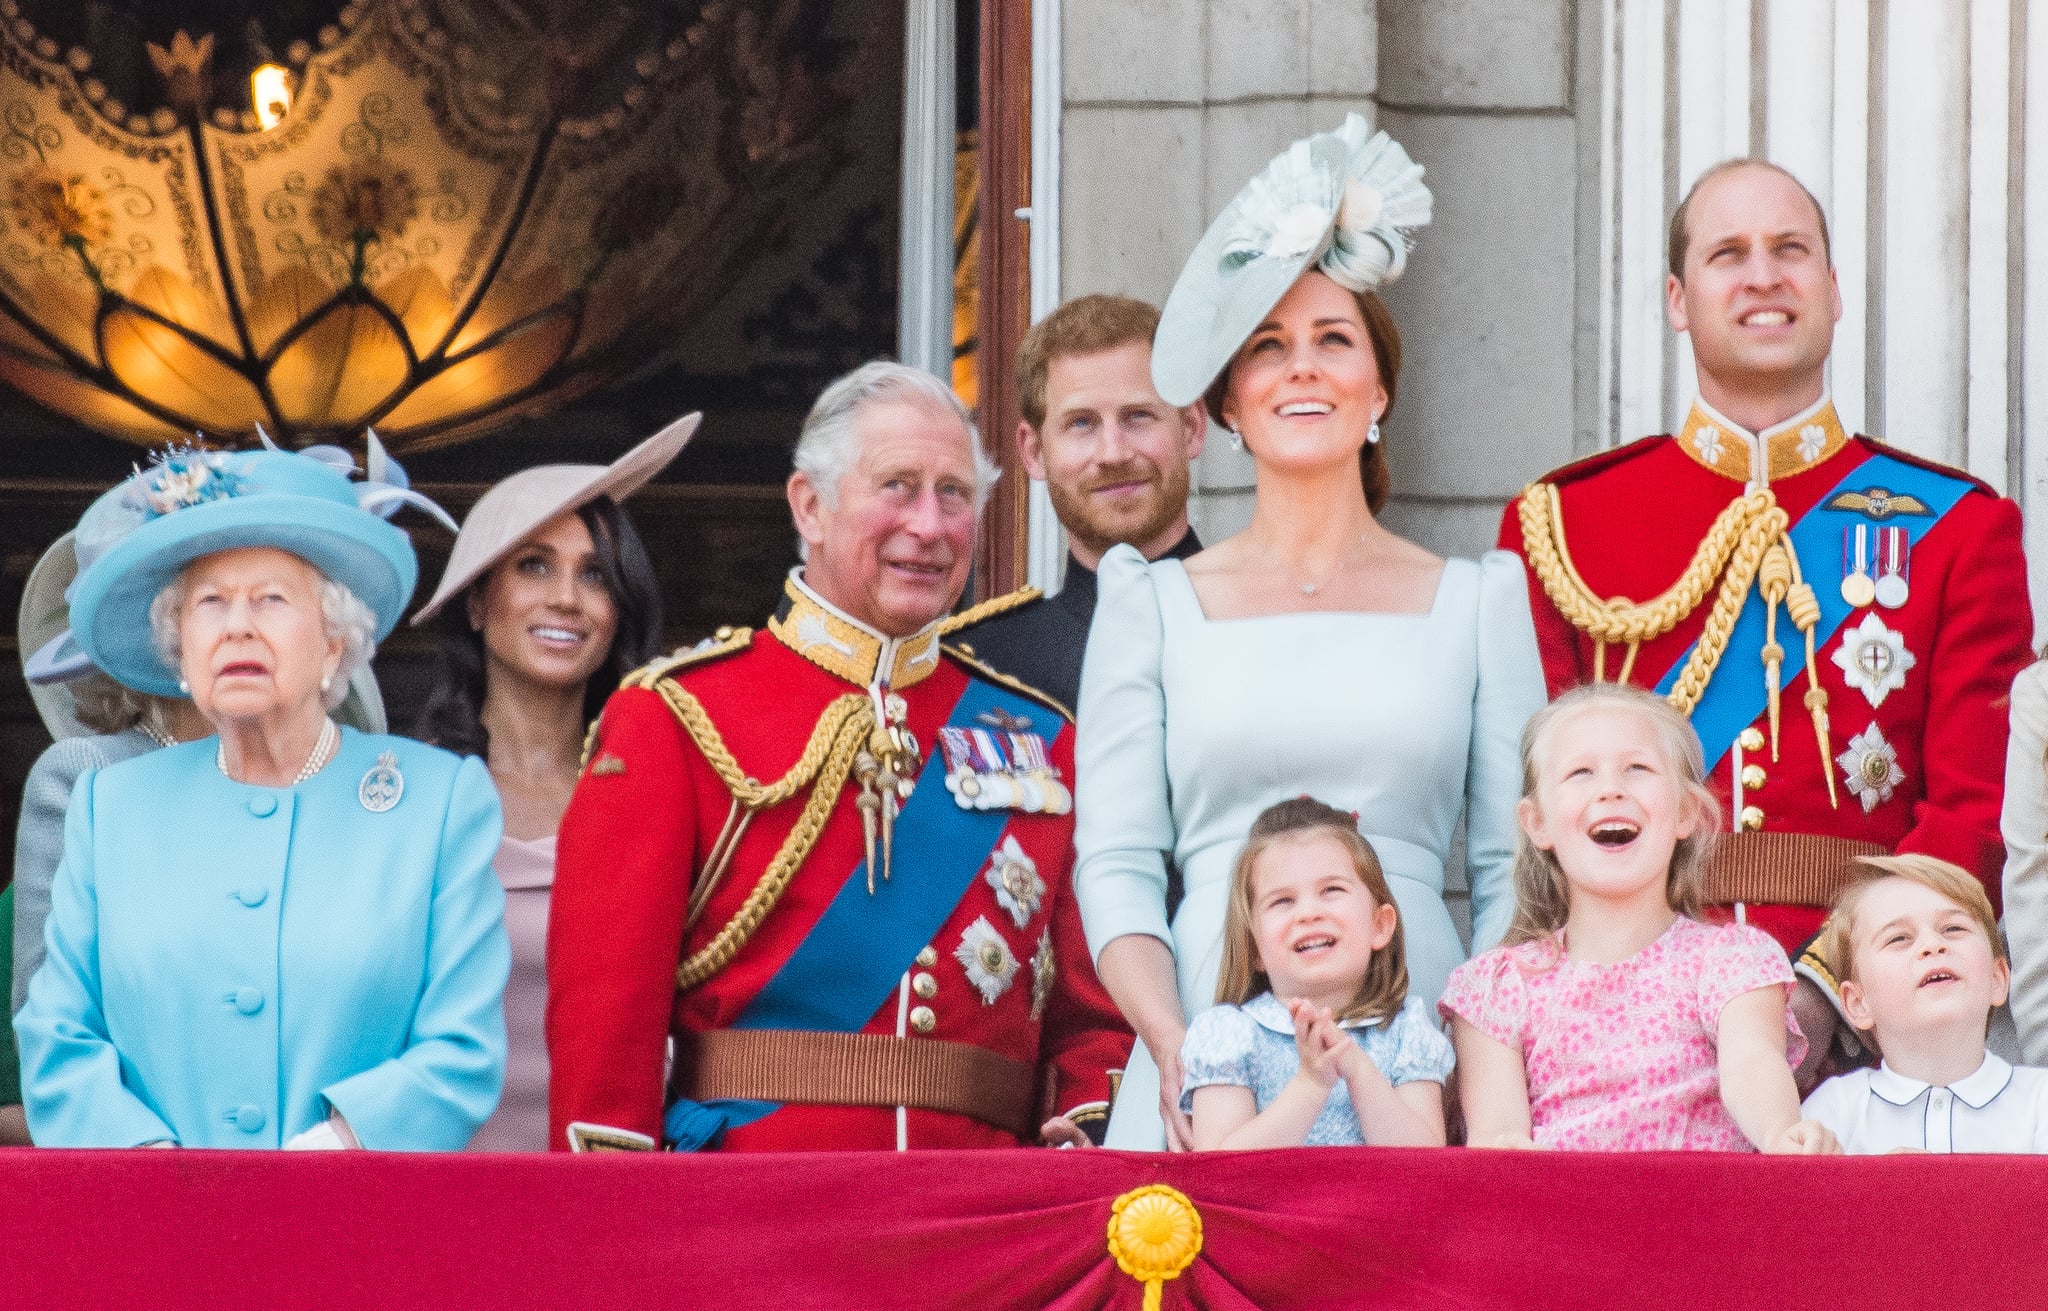 LONDON, ENGLAND - JUNE 09:  Queen Elizabeth II, Meghan, Duchess of Sussex, Prince Charles, Prince of Wales, Prince Harry, Duke of Sussex, Catherine, Duchess of Cambridge, Princess Charlotte of Cambridge, Savannah Phillips, Prince William, Duke of Cambridge and Prince George of Cambridge on the balcony of Buckingham Palace during Trooping The Colour 2018 on June 9, 2018 in London, England.  (Photo by Samir Hussein/Samir Hussein/WireImage)